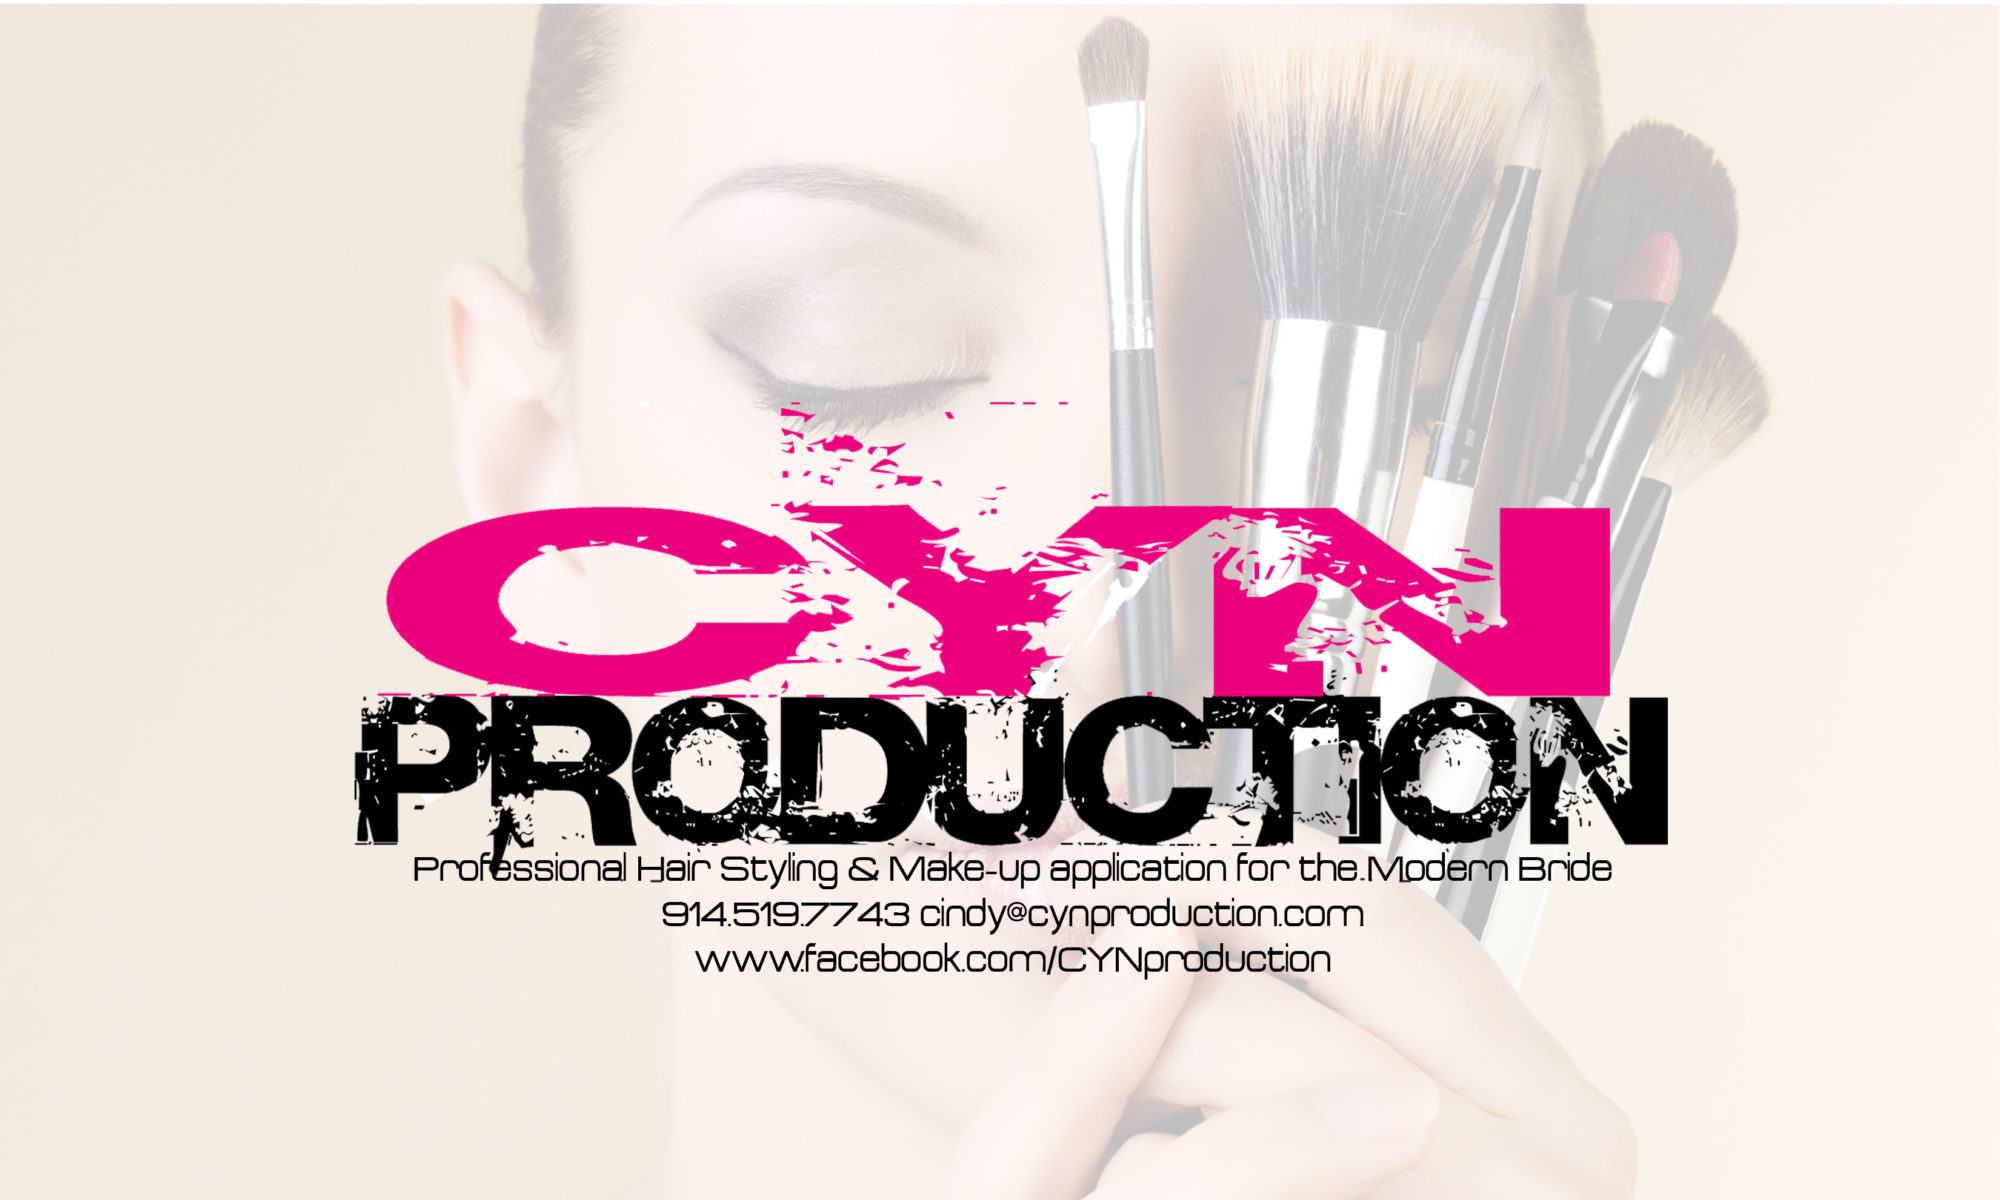 Cosmetic Services by CynProduction